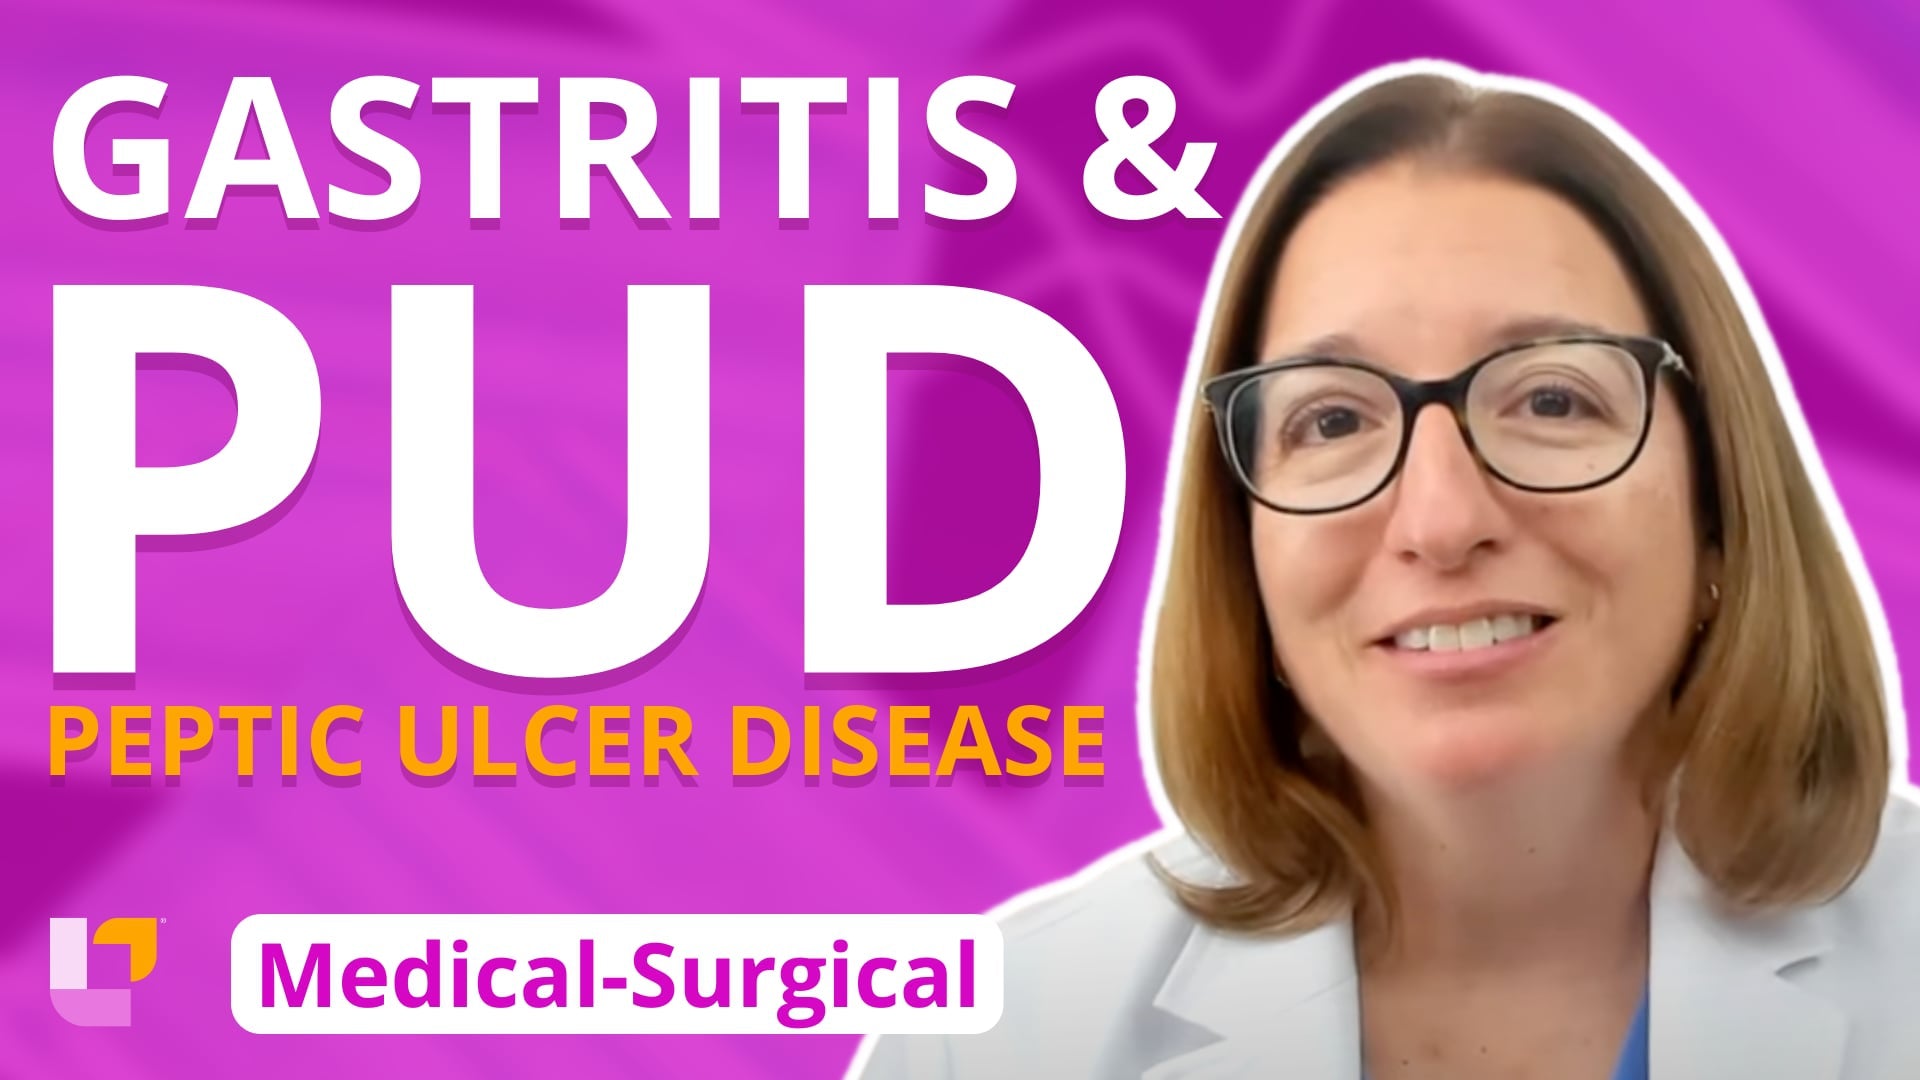 Med-Surg - Gastrointestinal System, part 5: Gastritis and Peptic Ulcer Disease - LevelUpRN